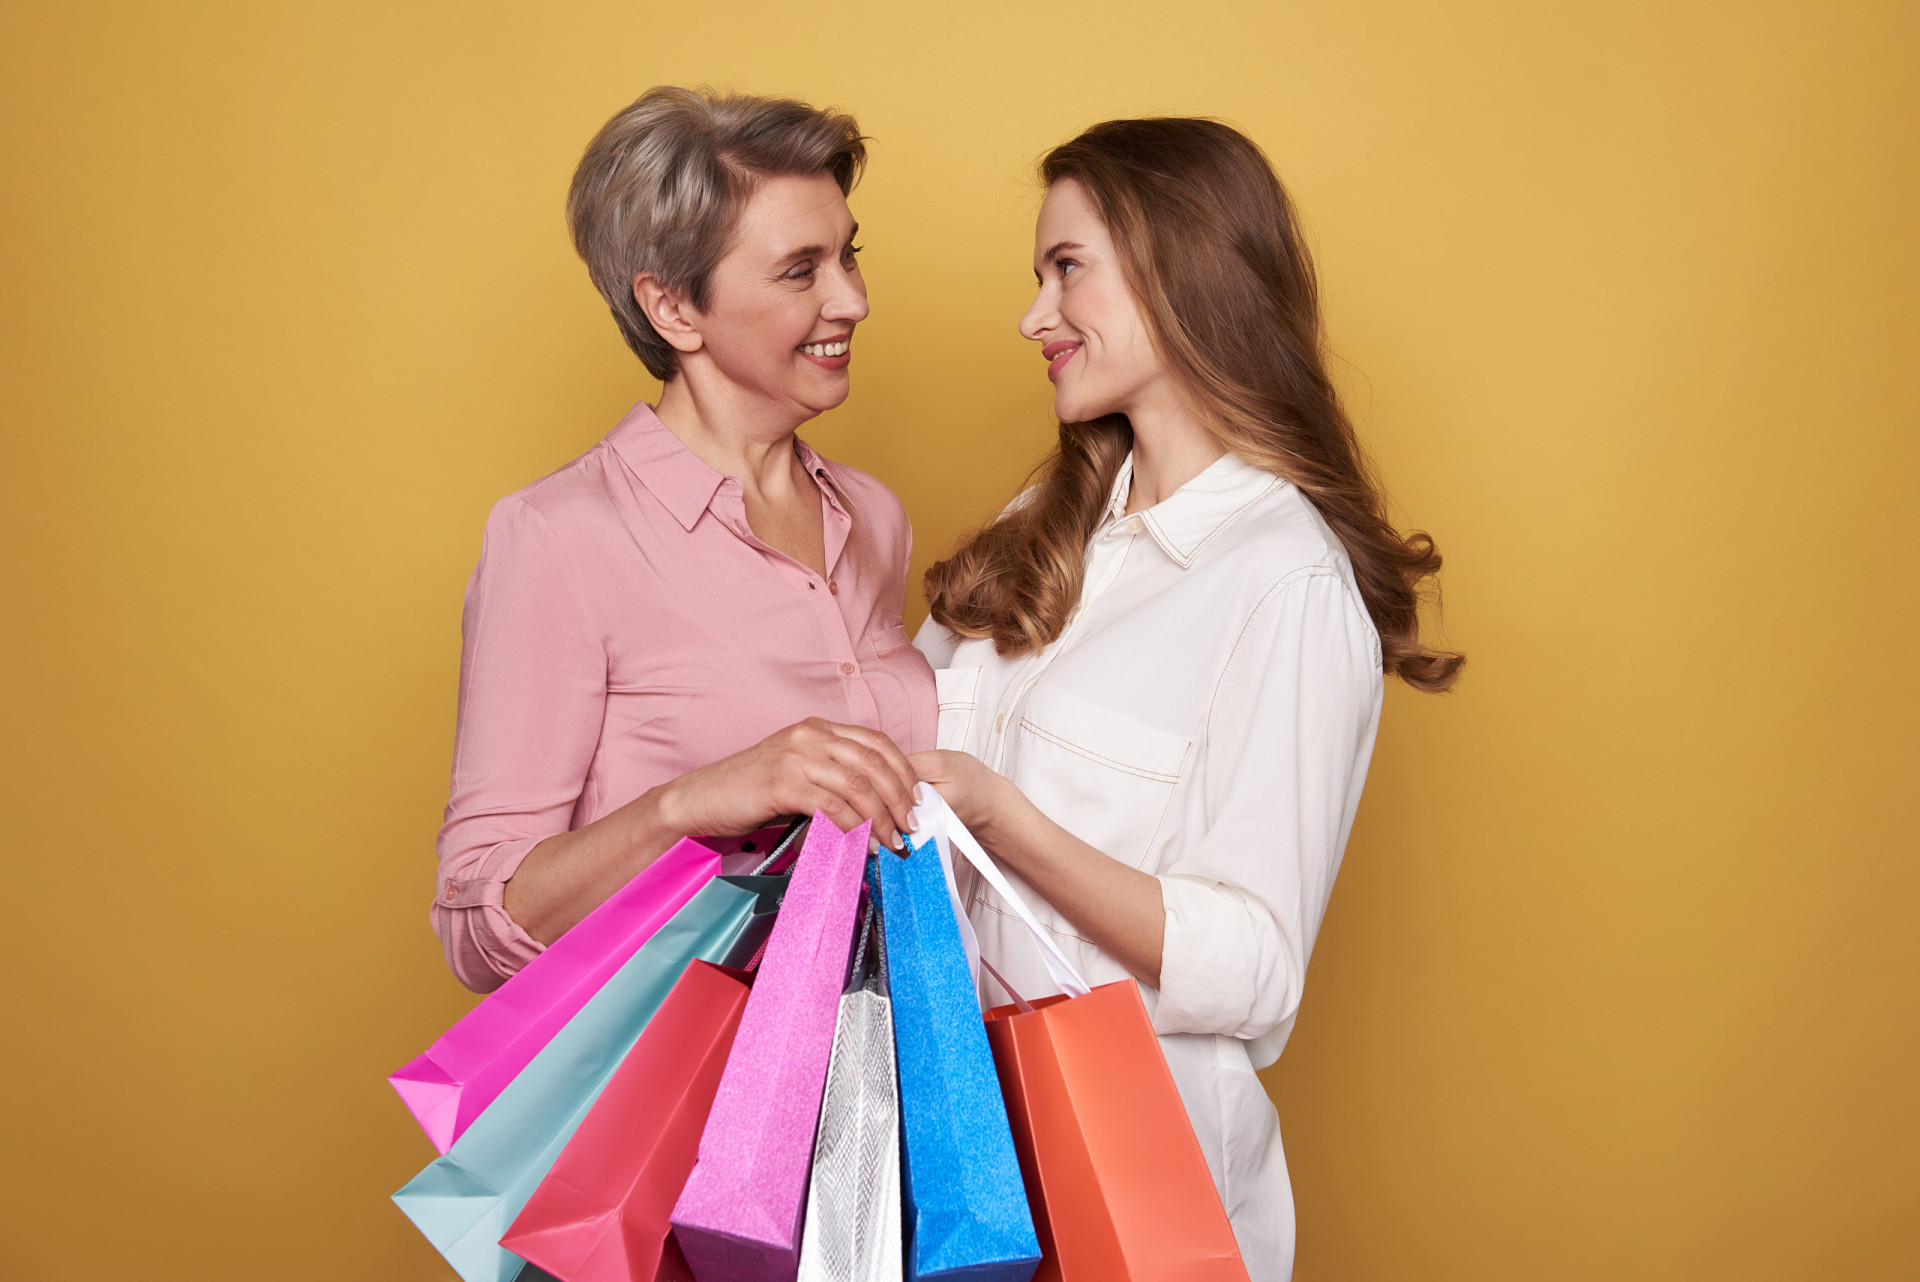 <p>If your mom is known for shopping or loves the occasional ‘treat yourself’ day, shopping for Mother’s Day might be the answer. You could even offer to go with her for added time together.</p><p><a href="https://www.msn.com/en-us/community/channel/vid-7xx8mnucu55yw63we9va2gwr7uihbxwc68fxqp25x6tg4ftibpra?cvid=94631541bc0f4f89bfd59158d696ad7e">Follow us and access great exclusive content every day</a></p>